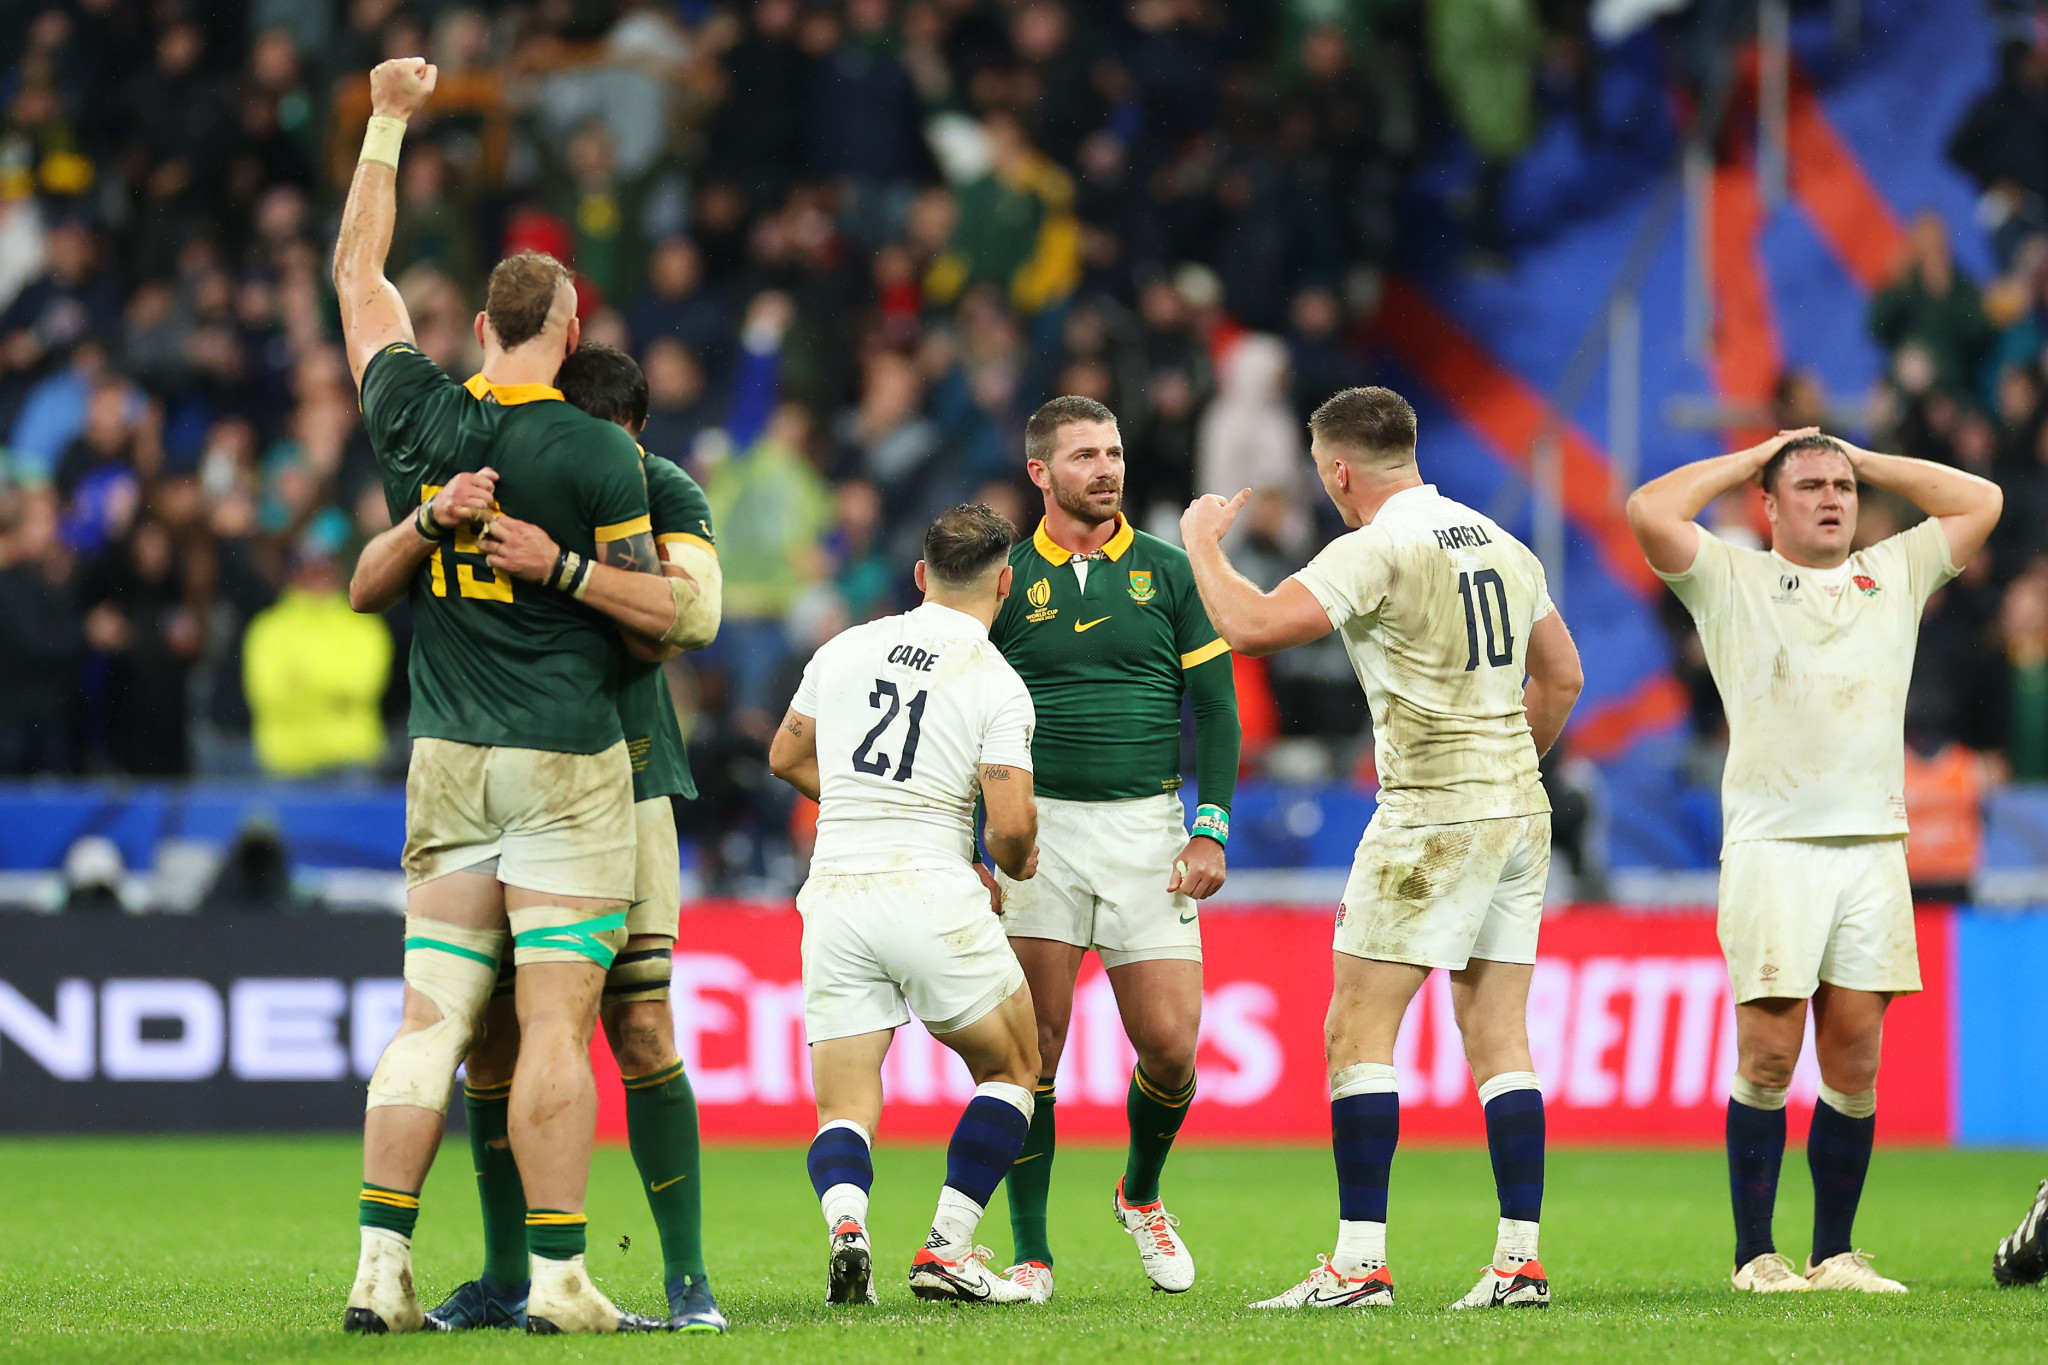 South Africa pipped England to Rugby World Cup semi-final victory ©Getty Images